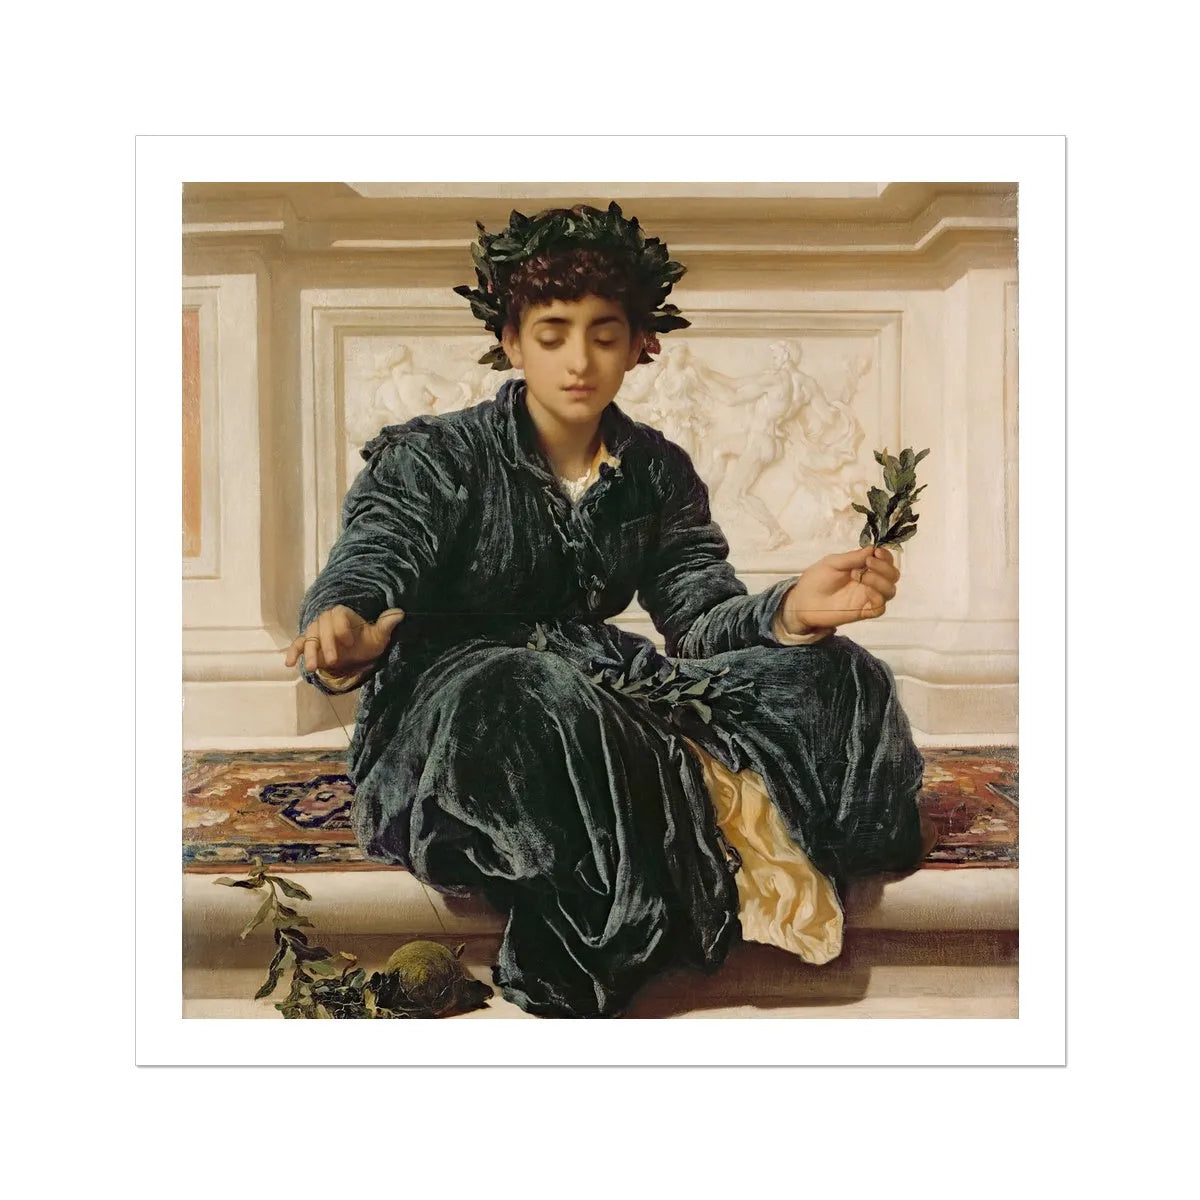 Weaving The Wreath By Frederic Leighton Fine Art Print - Posters Prints & Visual Artwork - Aesthetic Art